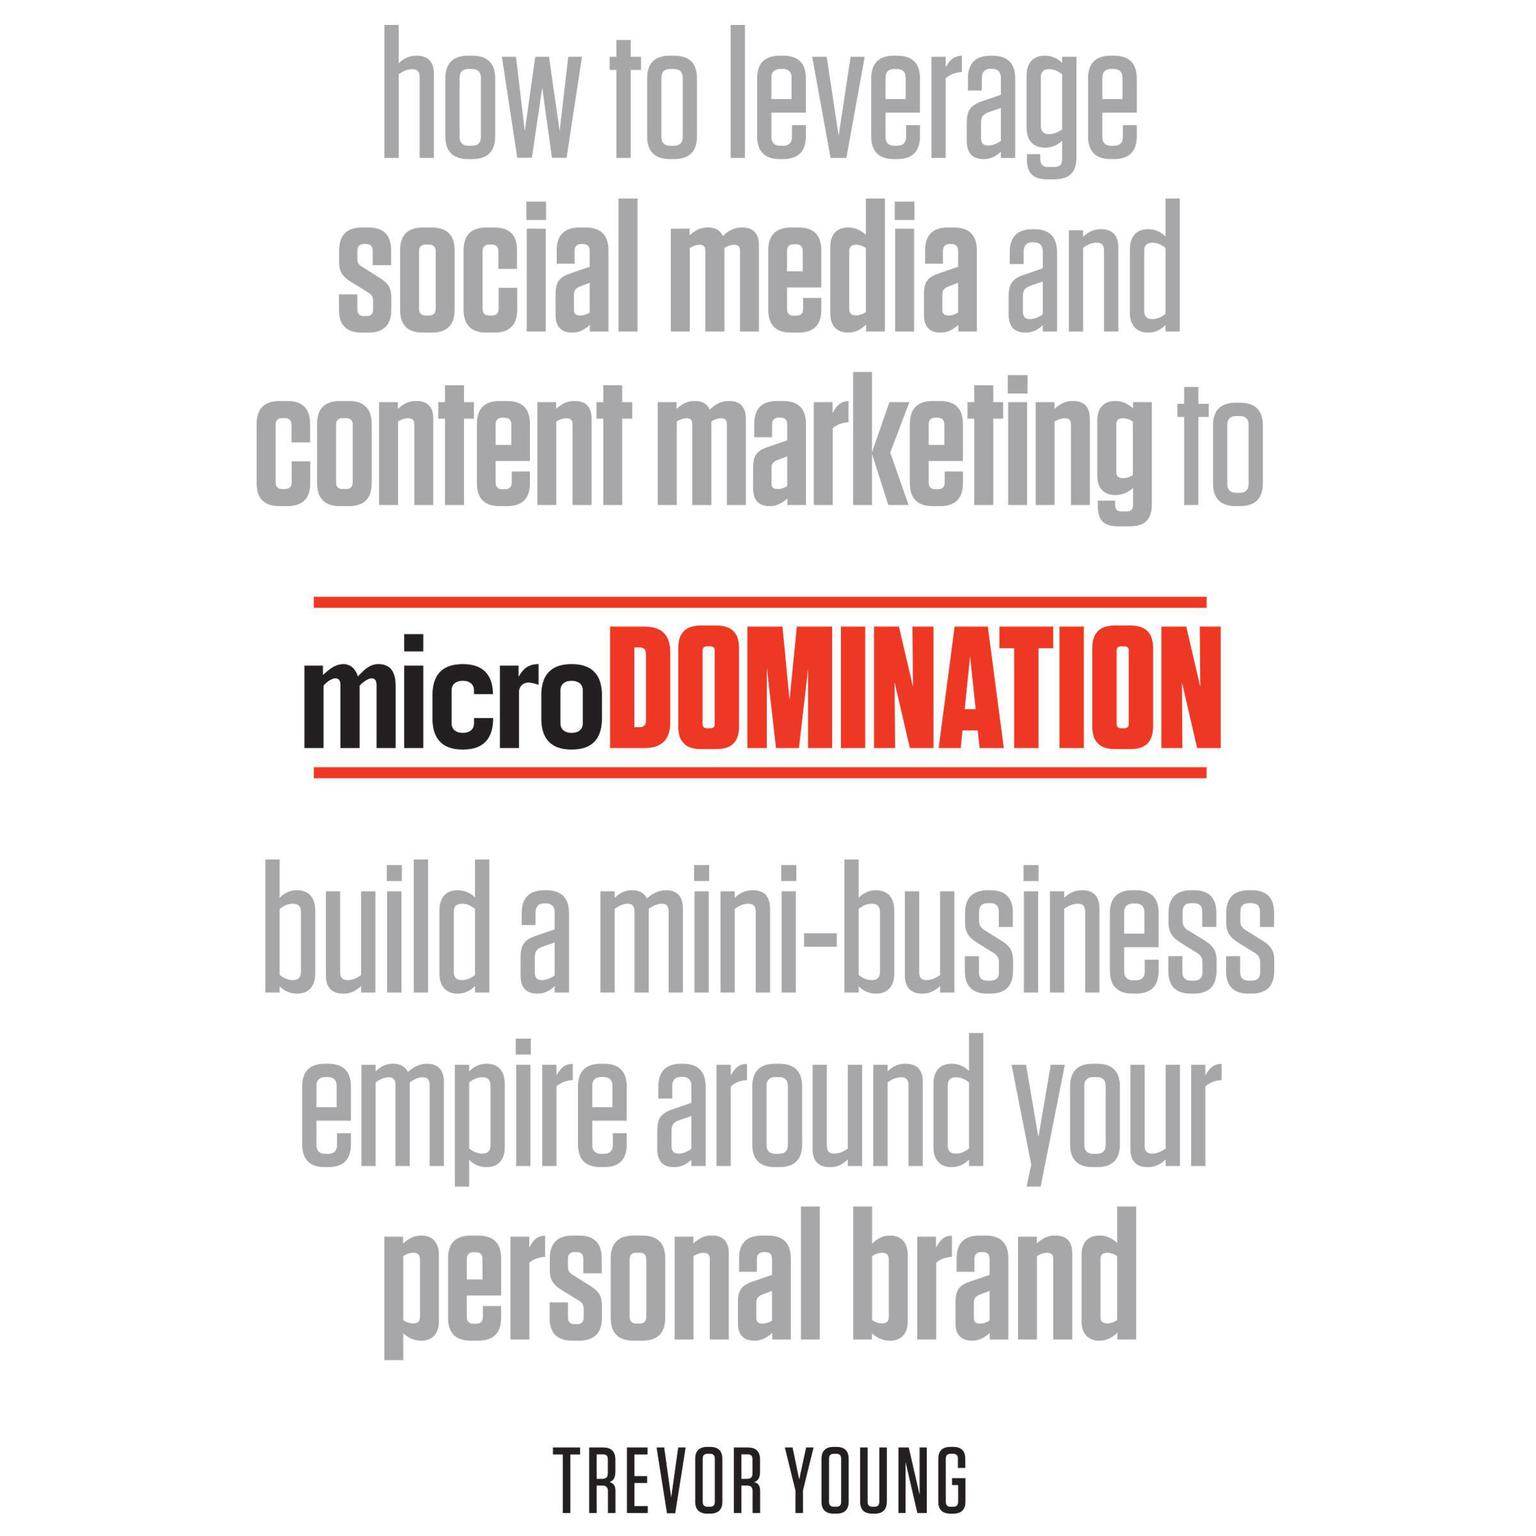 microDomination: How to leverage social media and content marketing to build a mini-business empire around your personal brand Audiobook, by Trevor Young